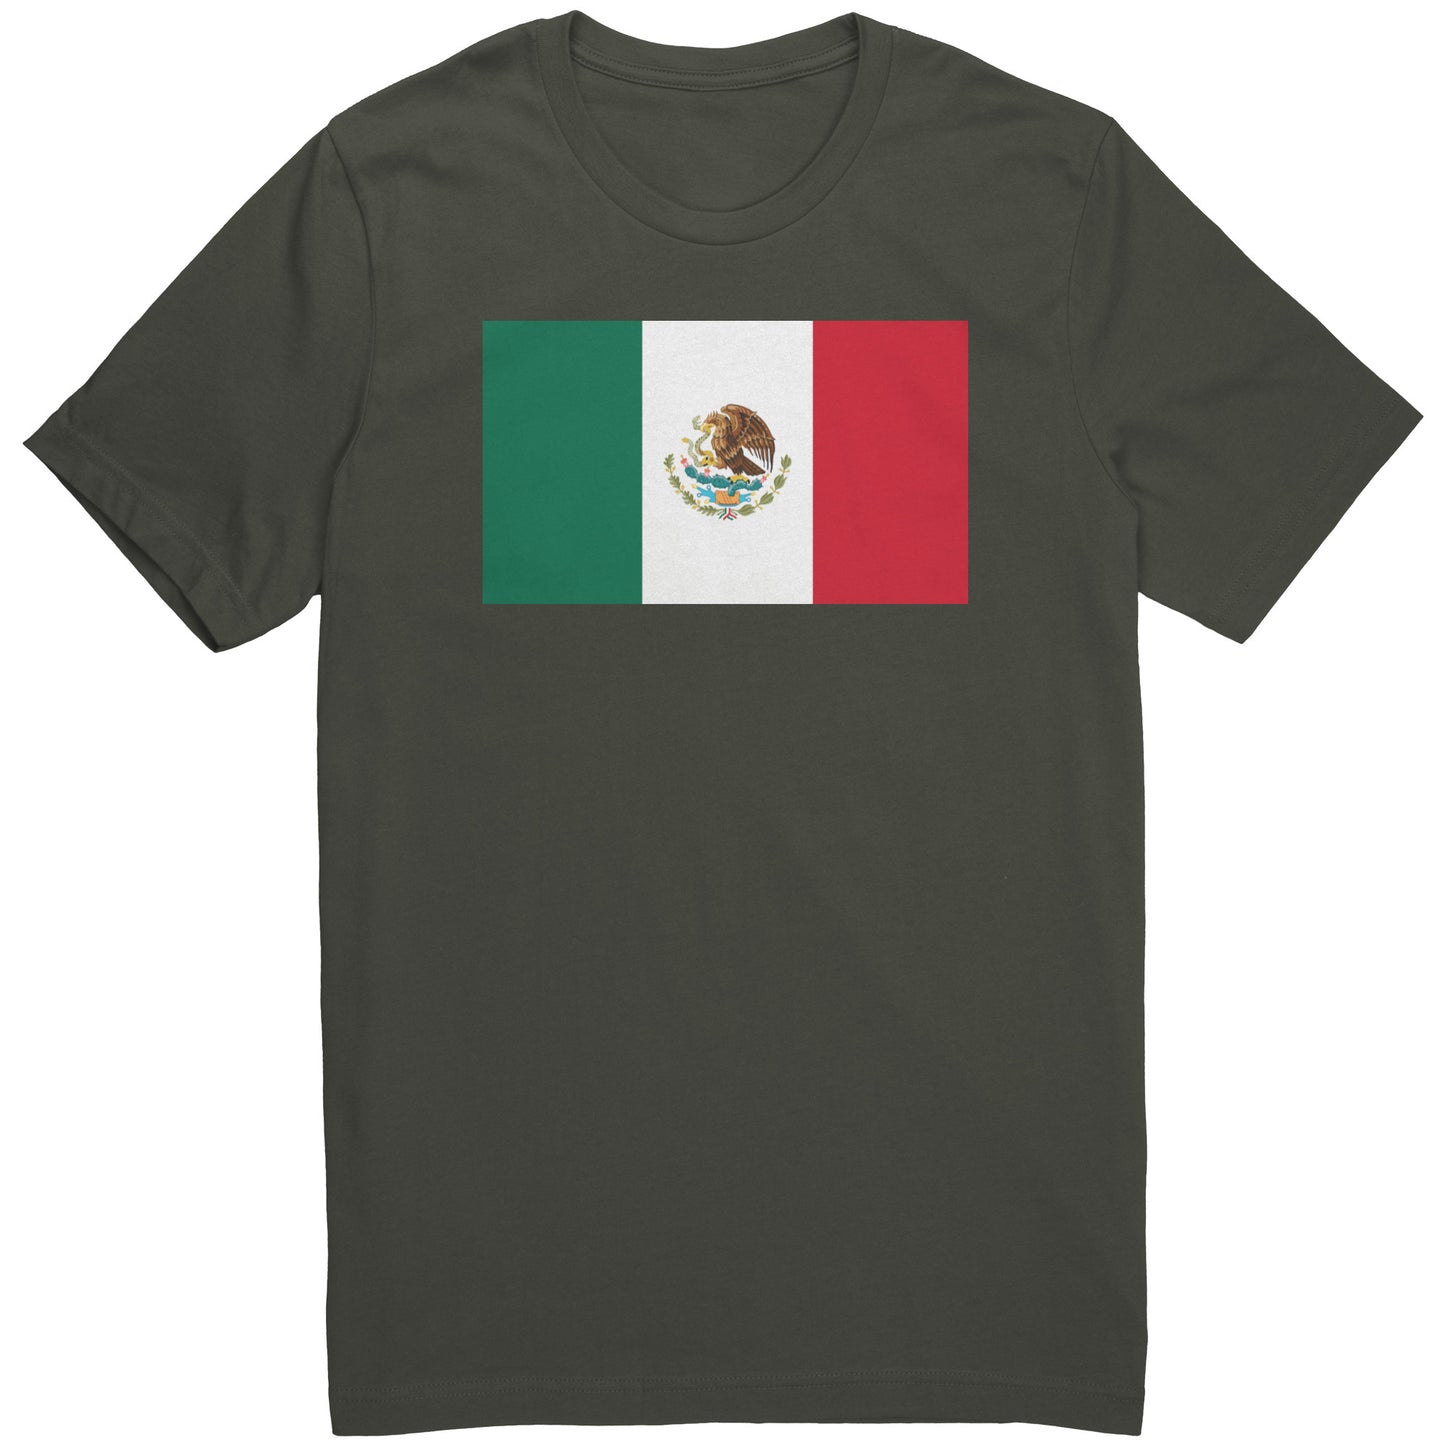 The flag of Mexico